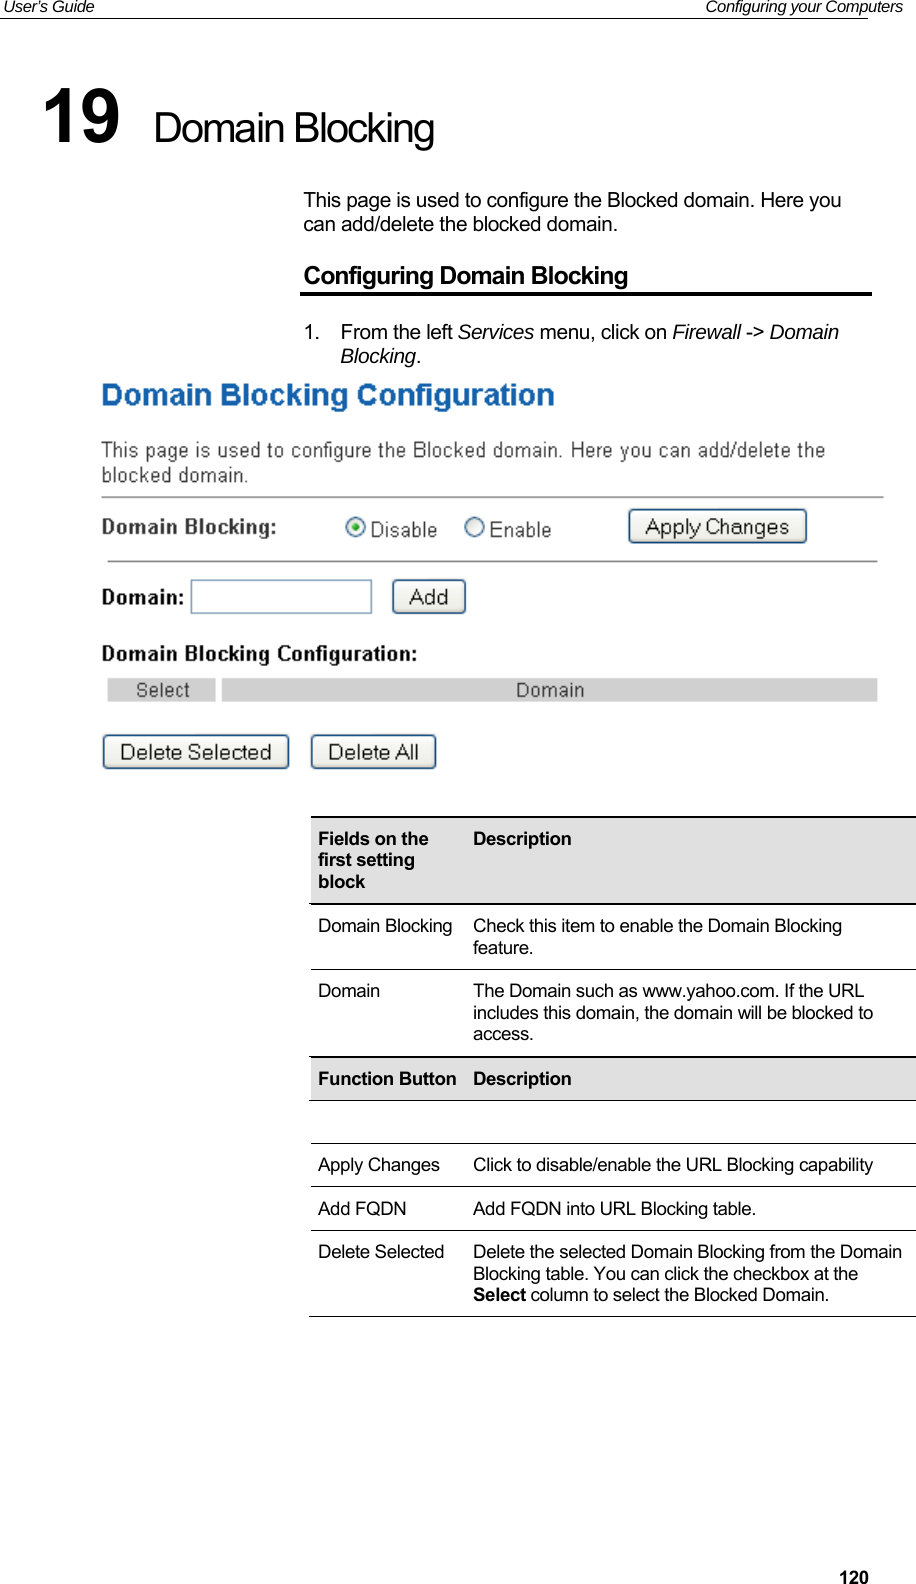 User’s Guide   Configuring your Computers  12019  Domain Blocking This page is used to configure the Blocked domain. Here you can add/delete the blocked domain. Configuring Domain Blocking 1.  From the left Services menu, click on Firewall -&gt; Domain Blocking.                          Fields on the first setting block Description Domain Blocking Check this item to enable the Domain Blocking  feature. Domain  The Domain such as www.yahoo.com. If the URL includes this domain, the domain will be blocked to access. Function Button Description Apply Changes  Click to disable/enable the URL Blocking capability Add FQDN  Add FQDN into URL Blocking table. Delete Selected  Delete the selected Domain Blocking from the Domain Blocking table. You can click the checkbox at the Select column to select the Blocked Domain. 